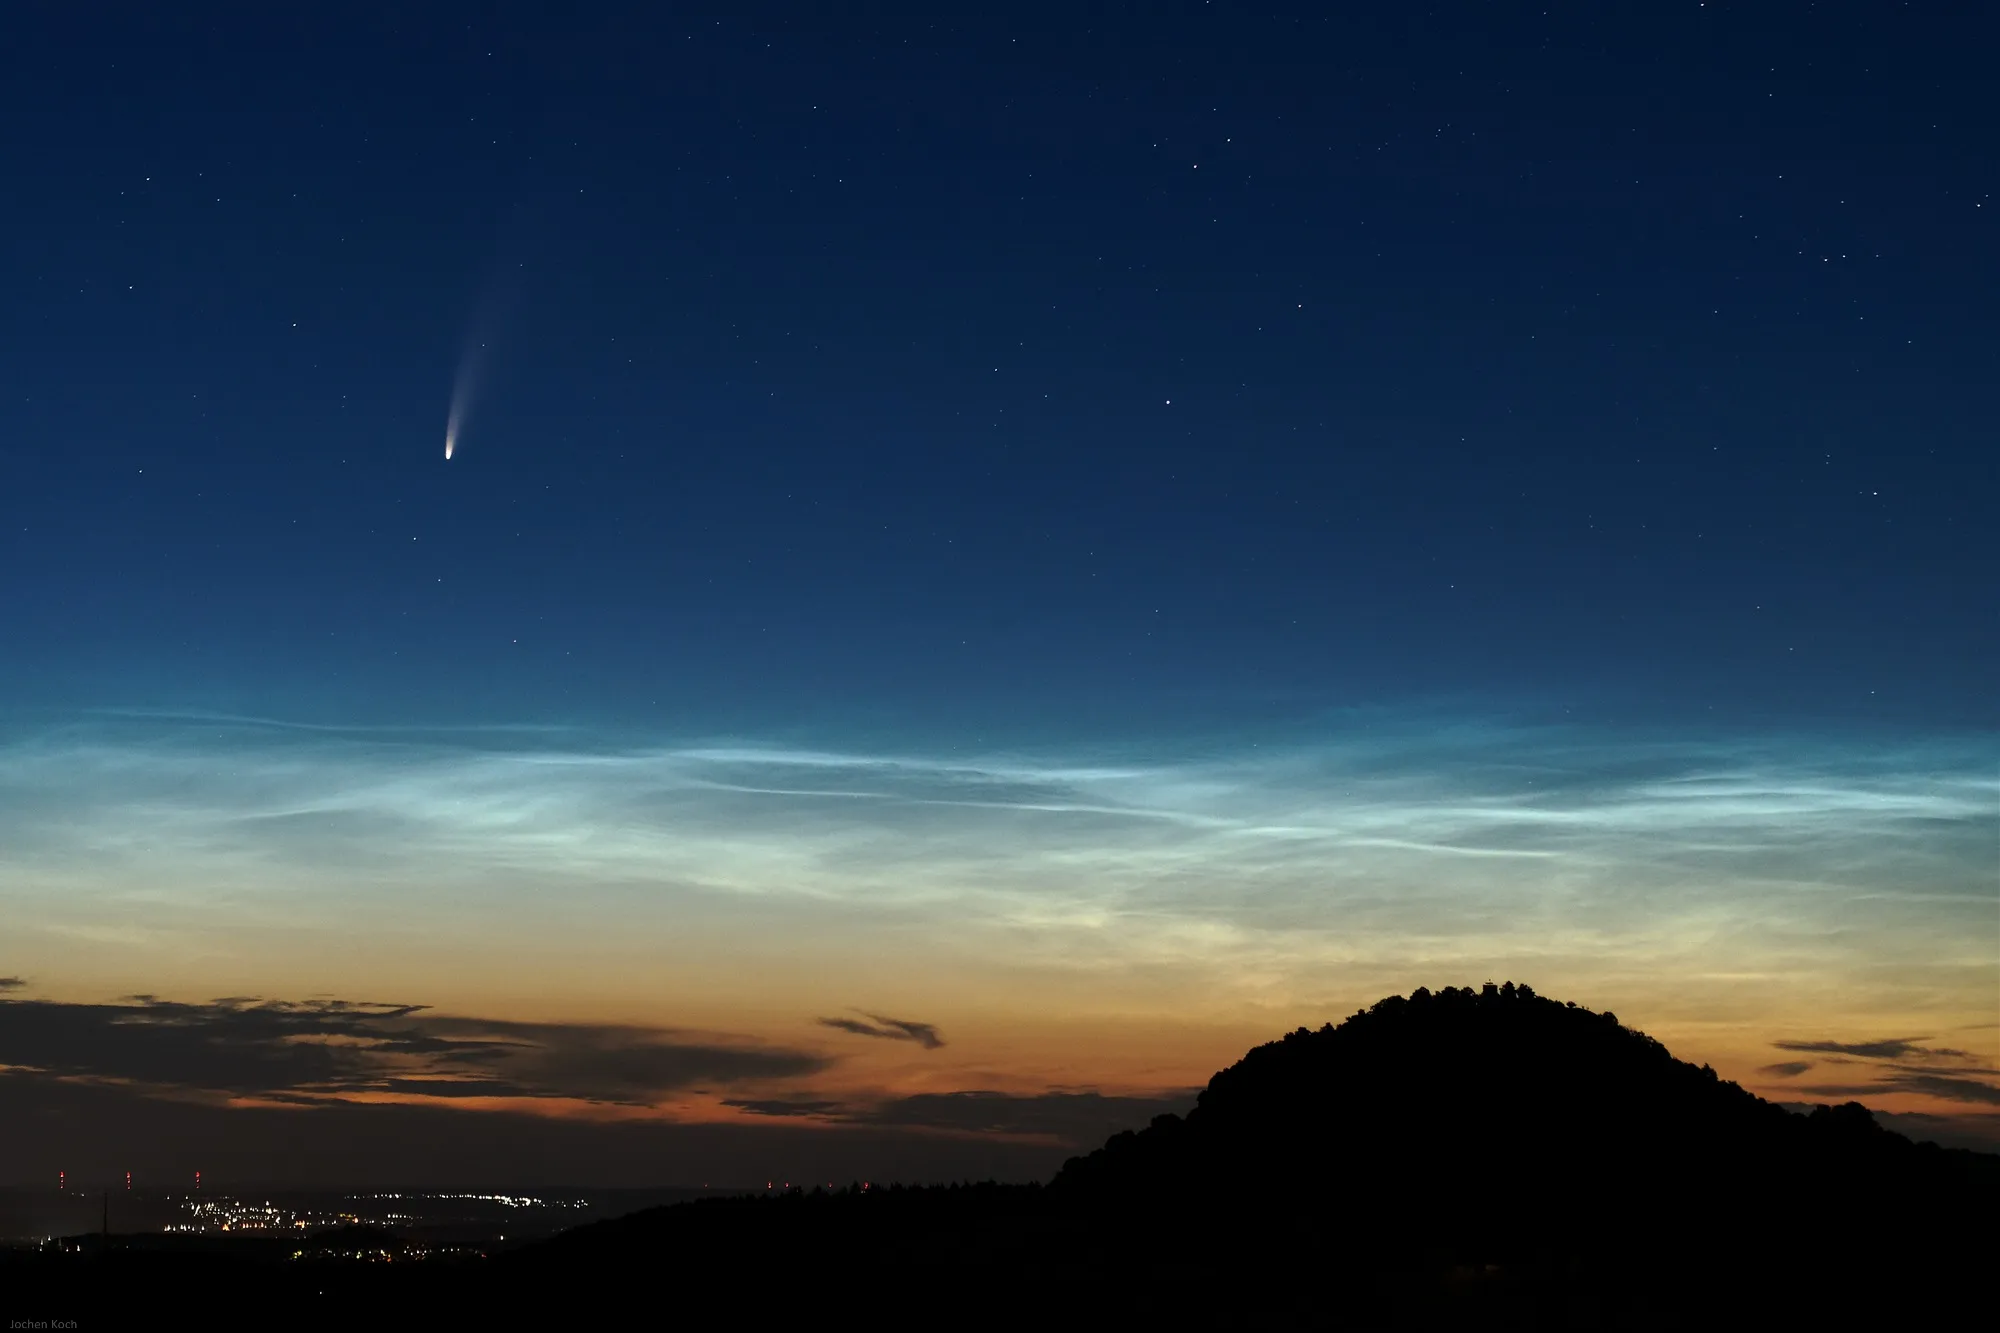 Photo showing: Comet C/2020 F3 (NEOWISE) with noctilucent clouds.
Location: Georgenberg, Reutlingen, Germany.
Date: 2020/07/10

Time: 01:44 UTC